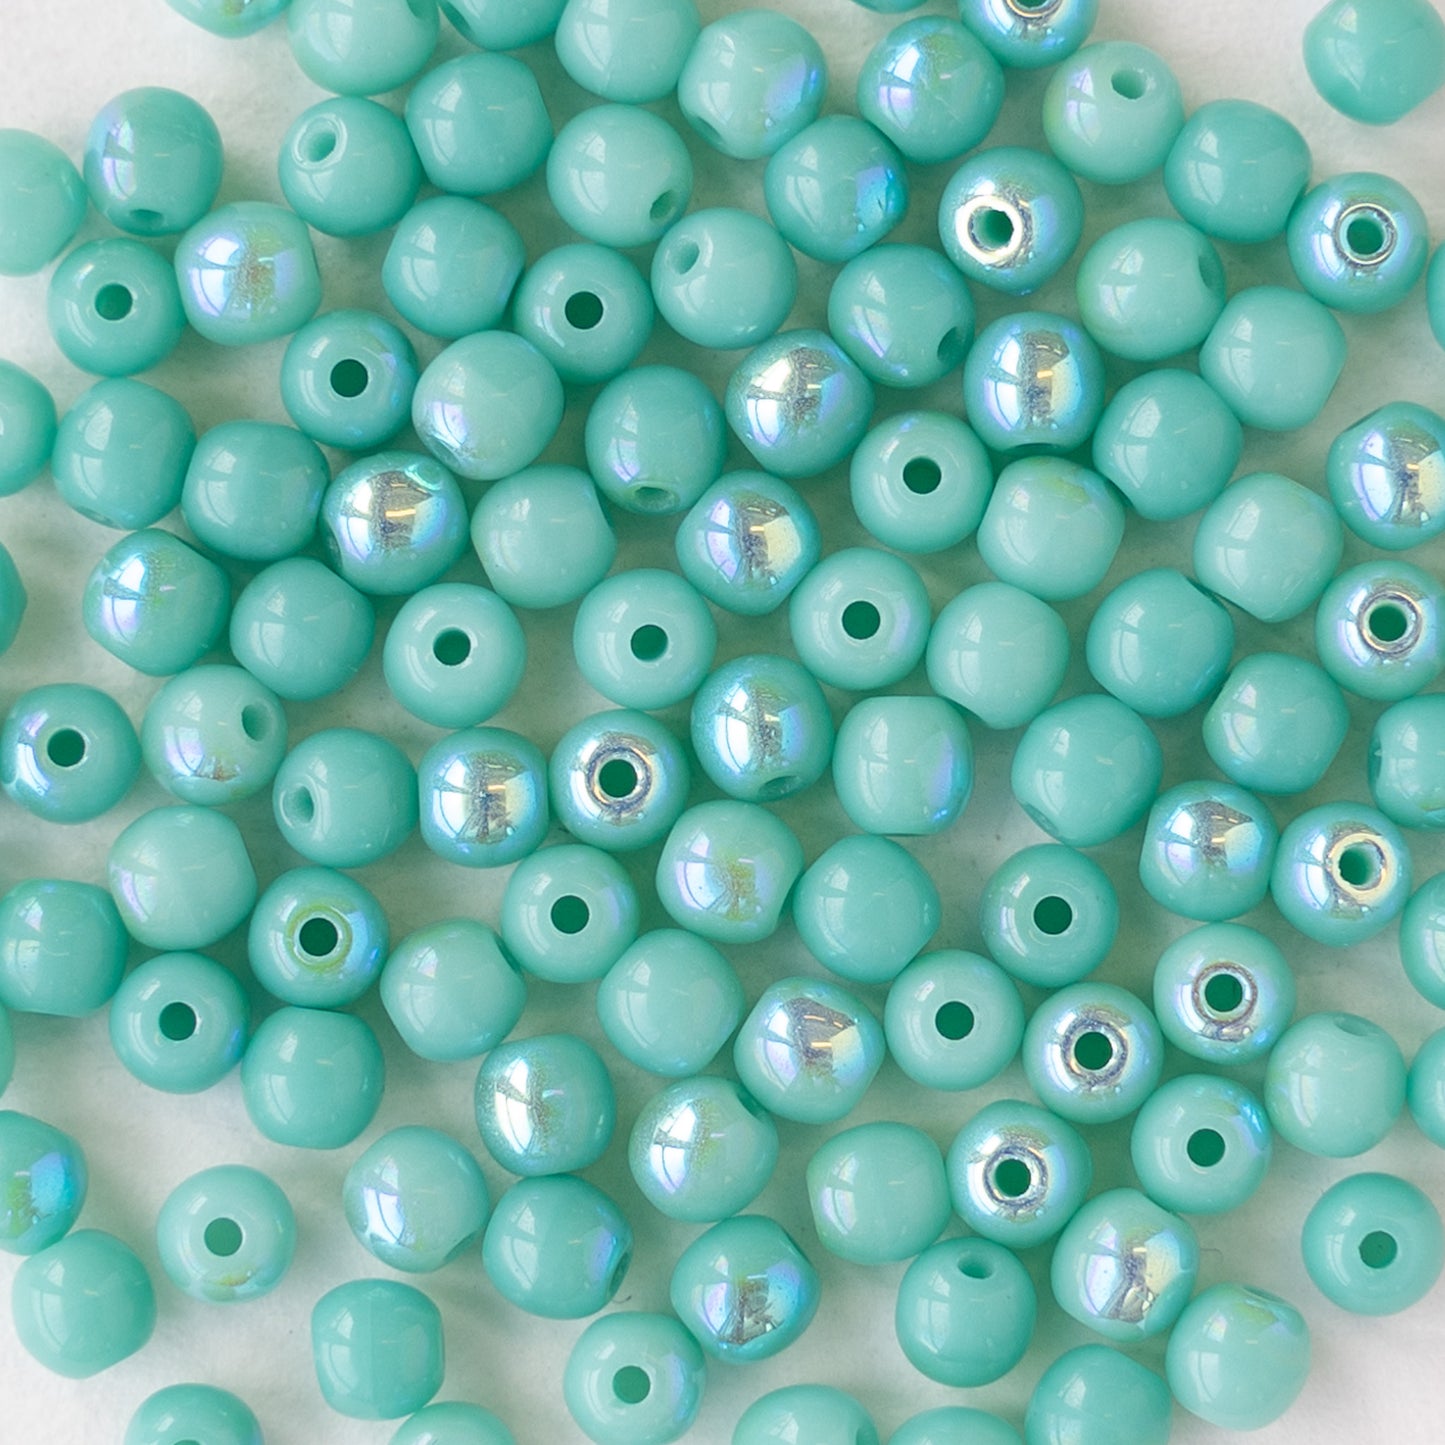 3mm Round Glass Beads - Opaque Seafoam Sparkle - 120 Beads